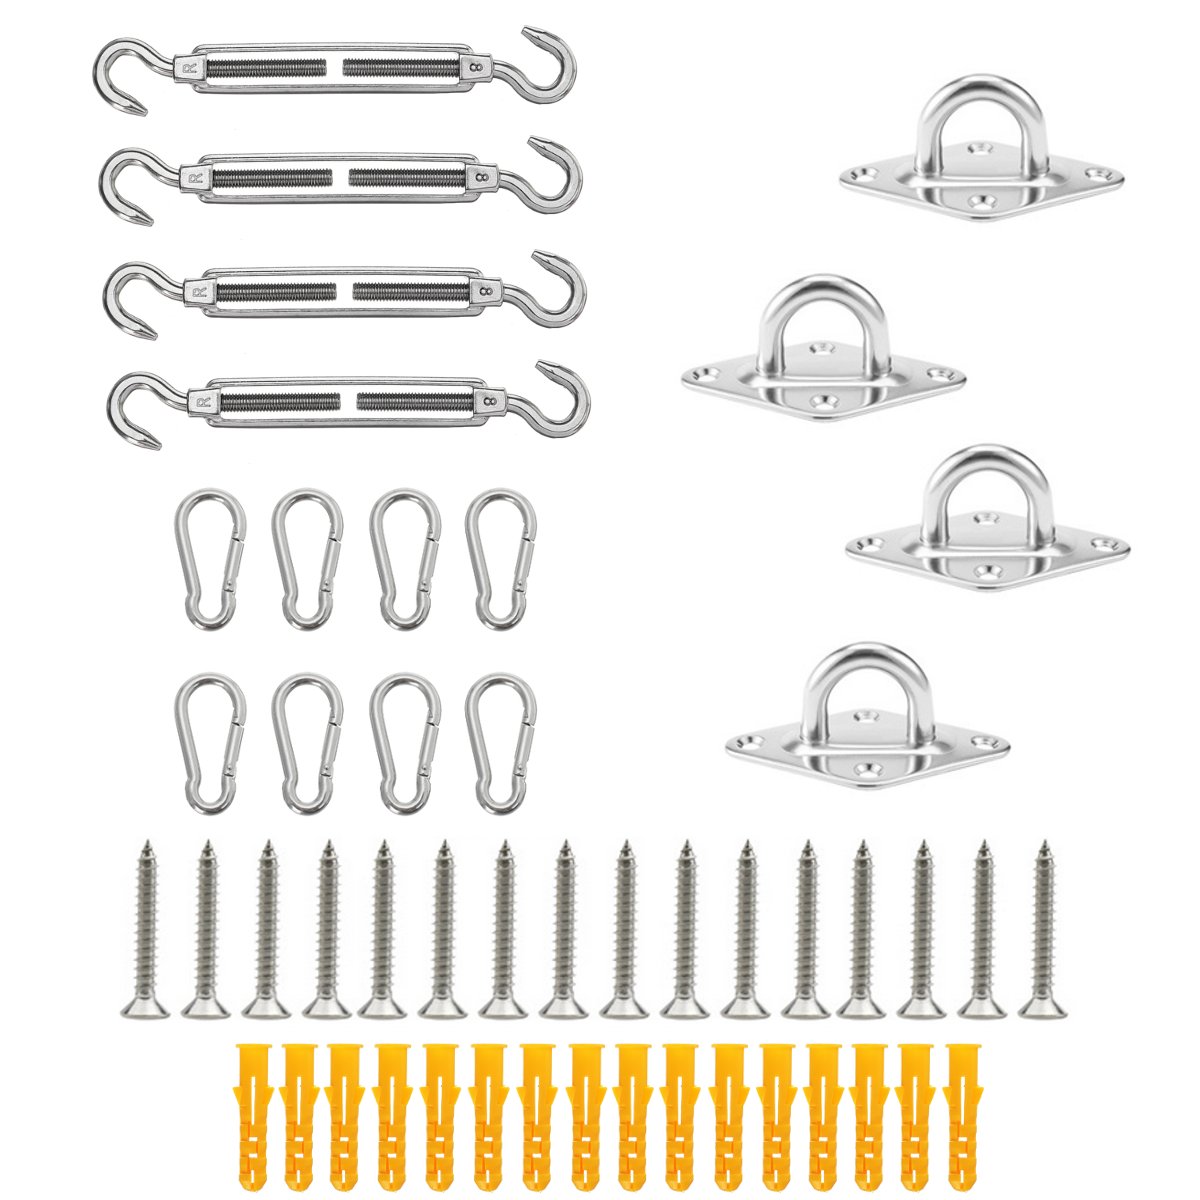 Stainless-Steel-Sun-Sail-Shade-Fixing-Accessory-Kit-Garden-Patio-Canopy-DIY-Replacement-Accessories-1564076